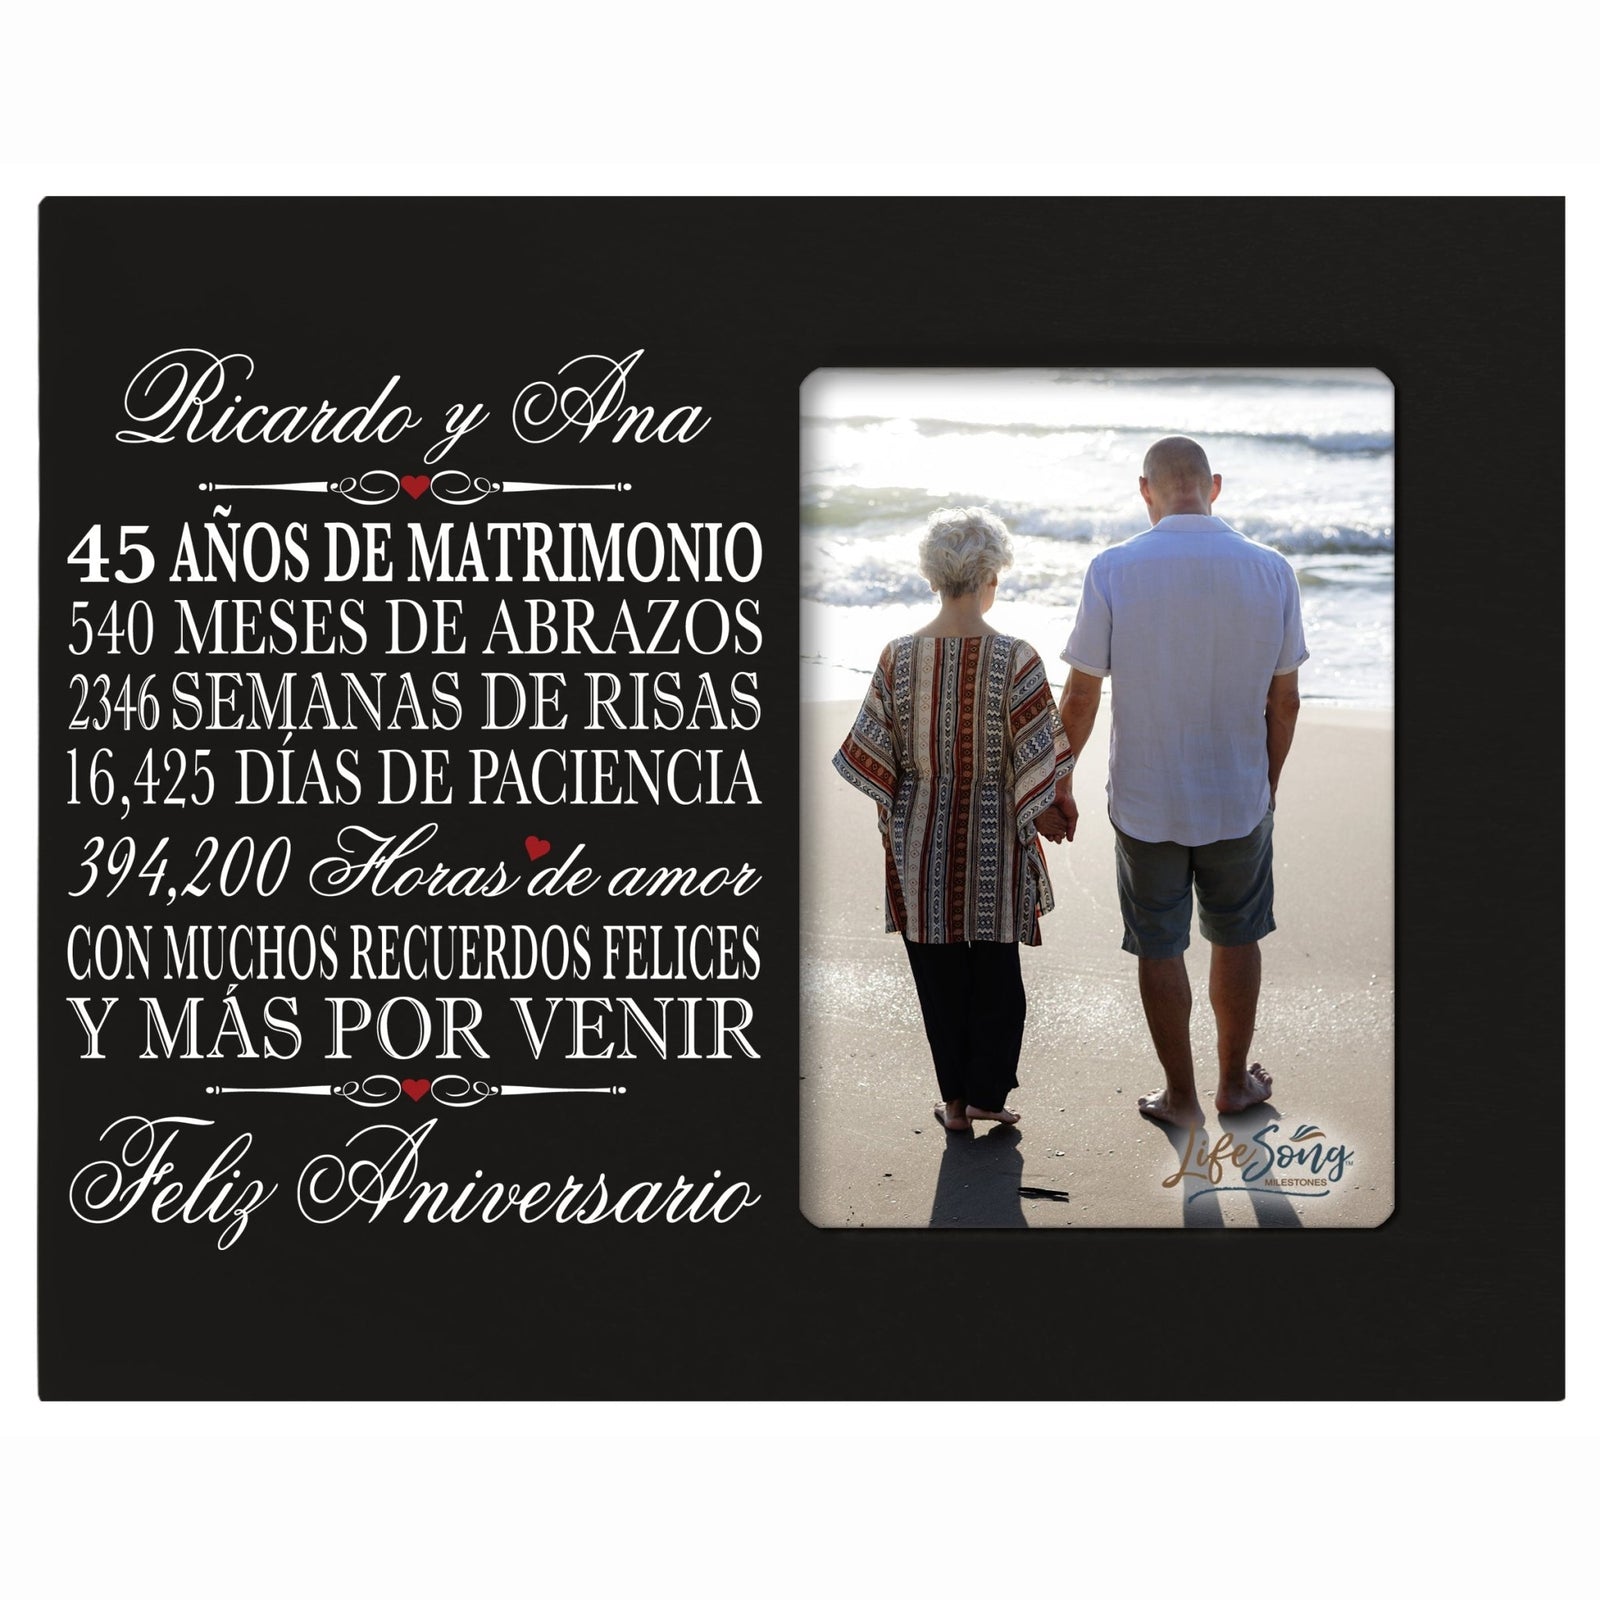 Lifesong Milestones Personalized Couples 45th Wedding Anniversary Spanish Picture Frame